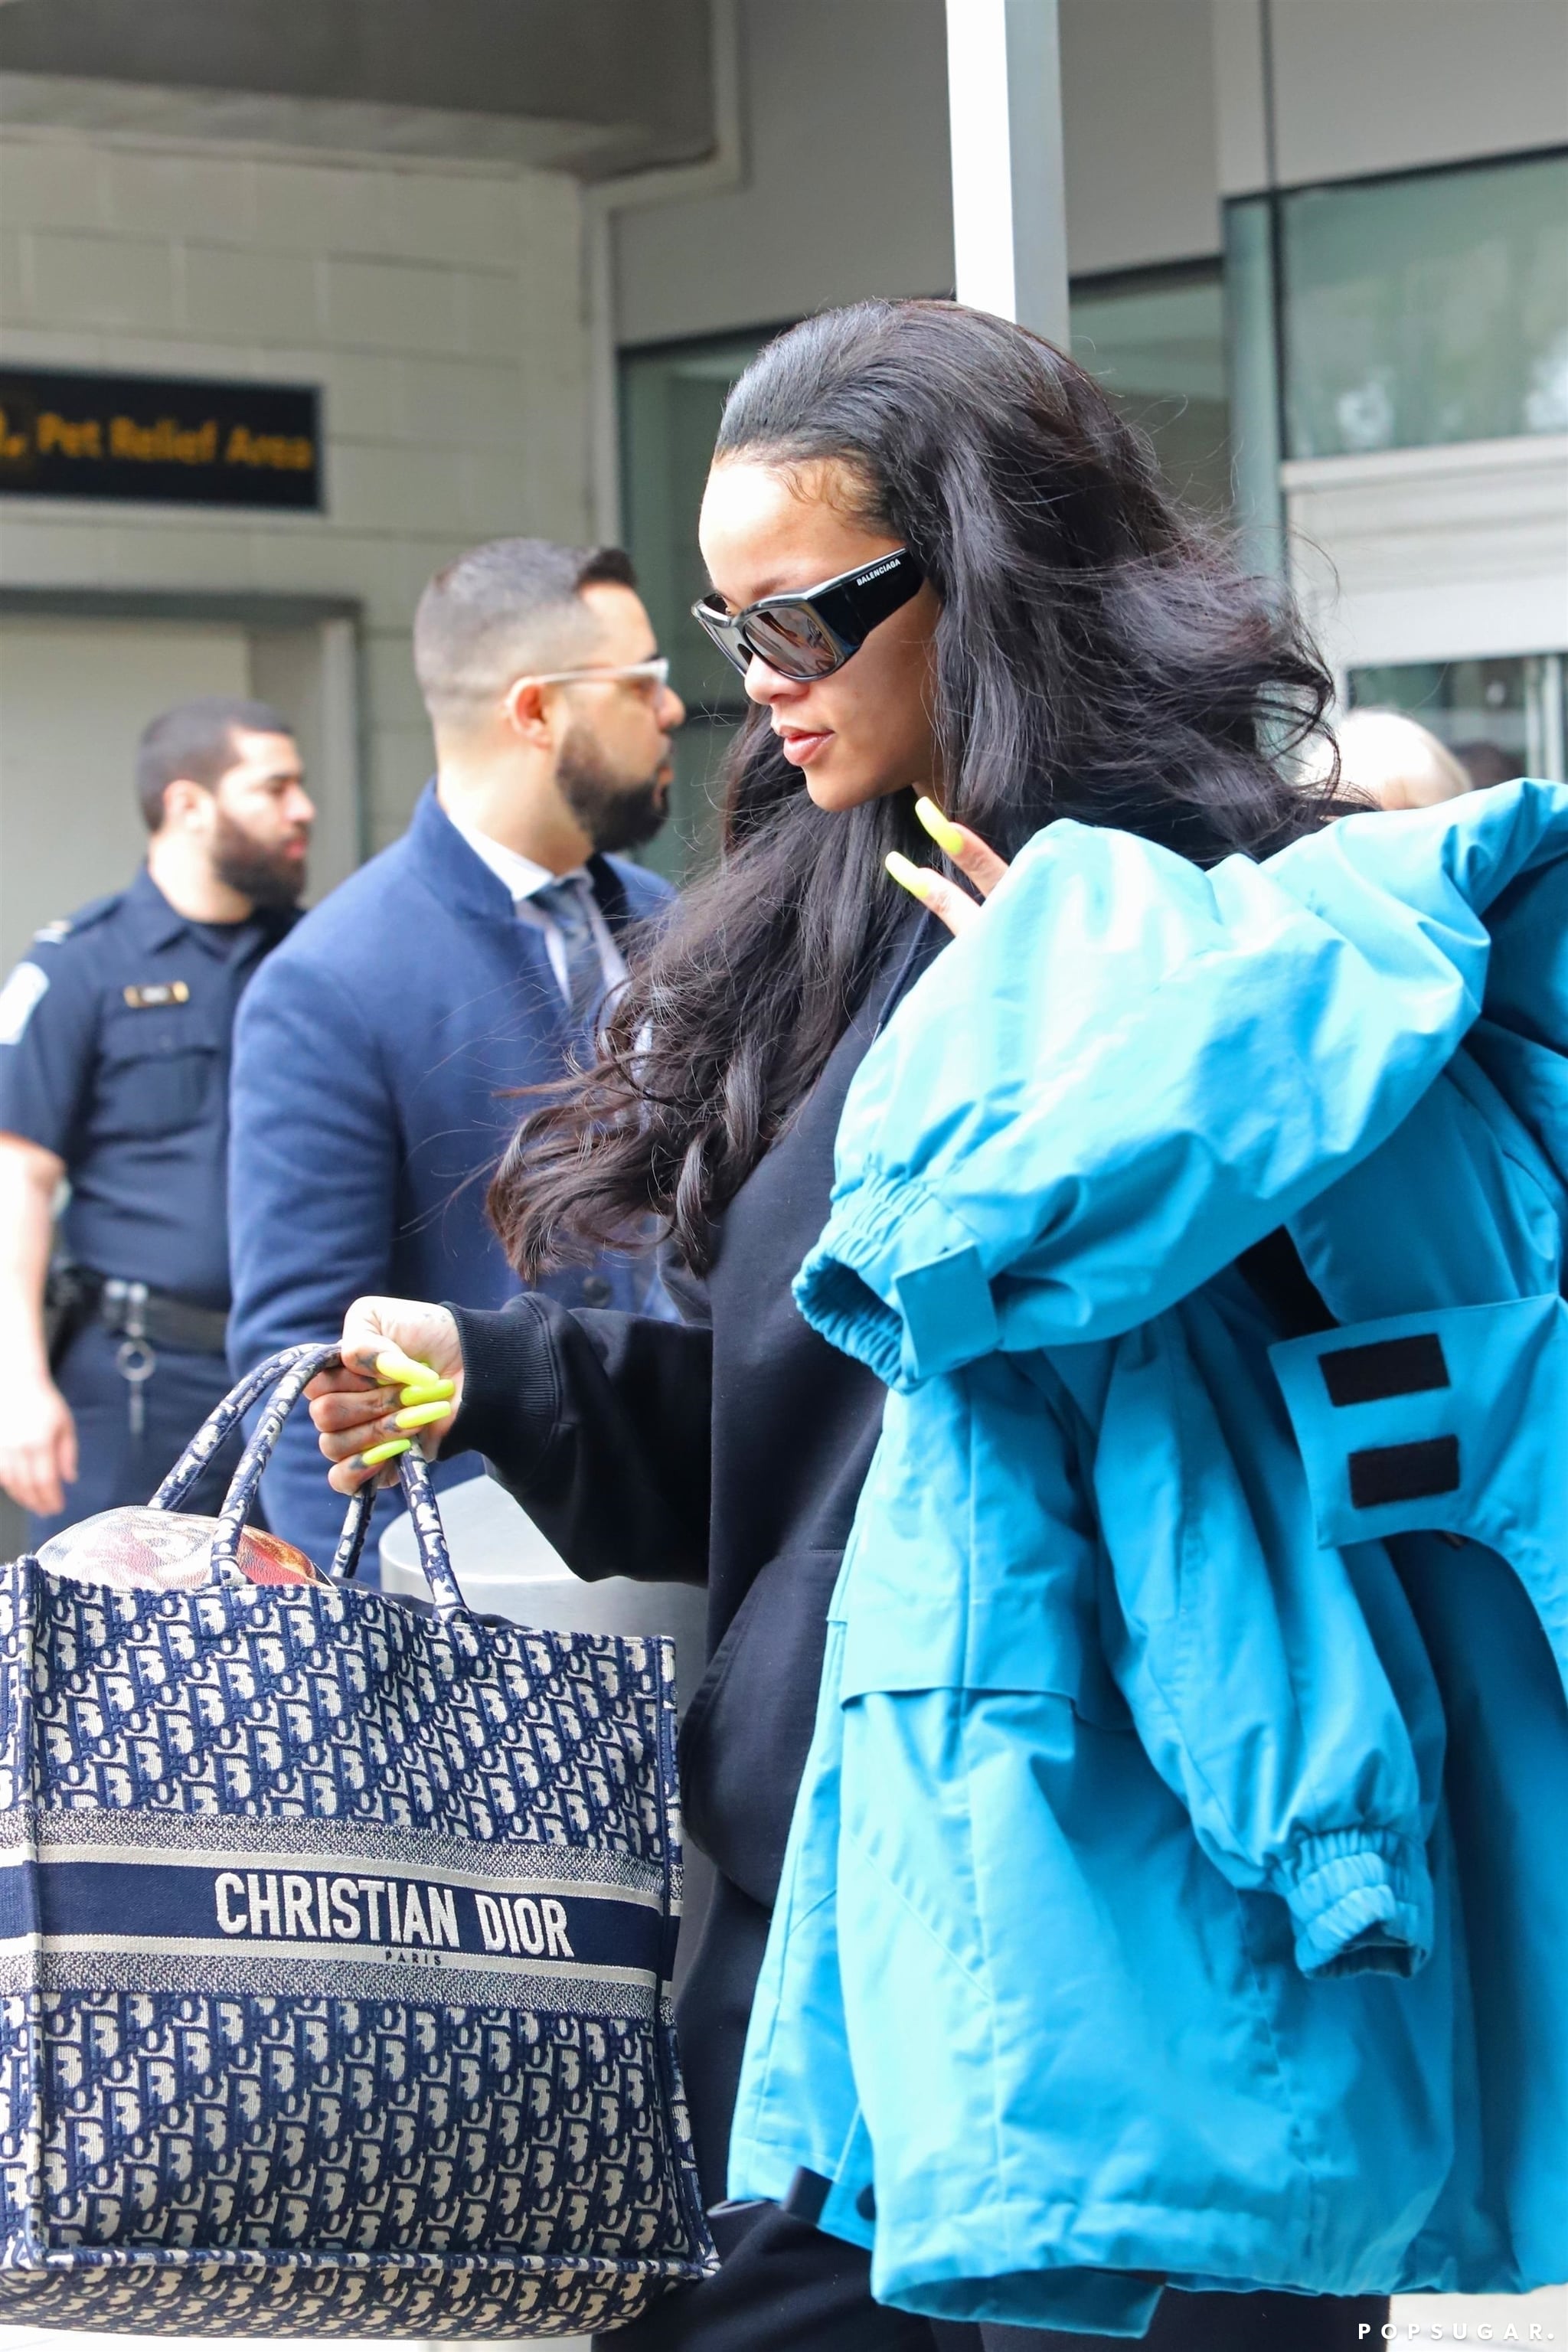 Rihanna's Dior Bag With Her Name on It